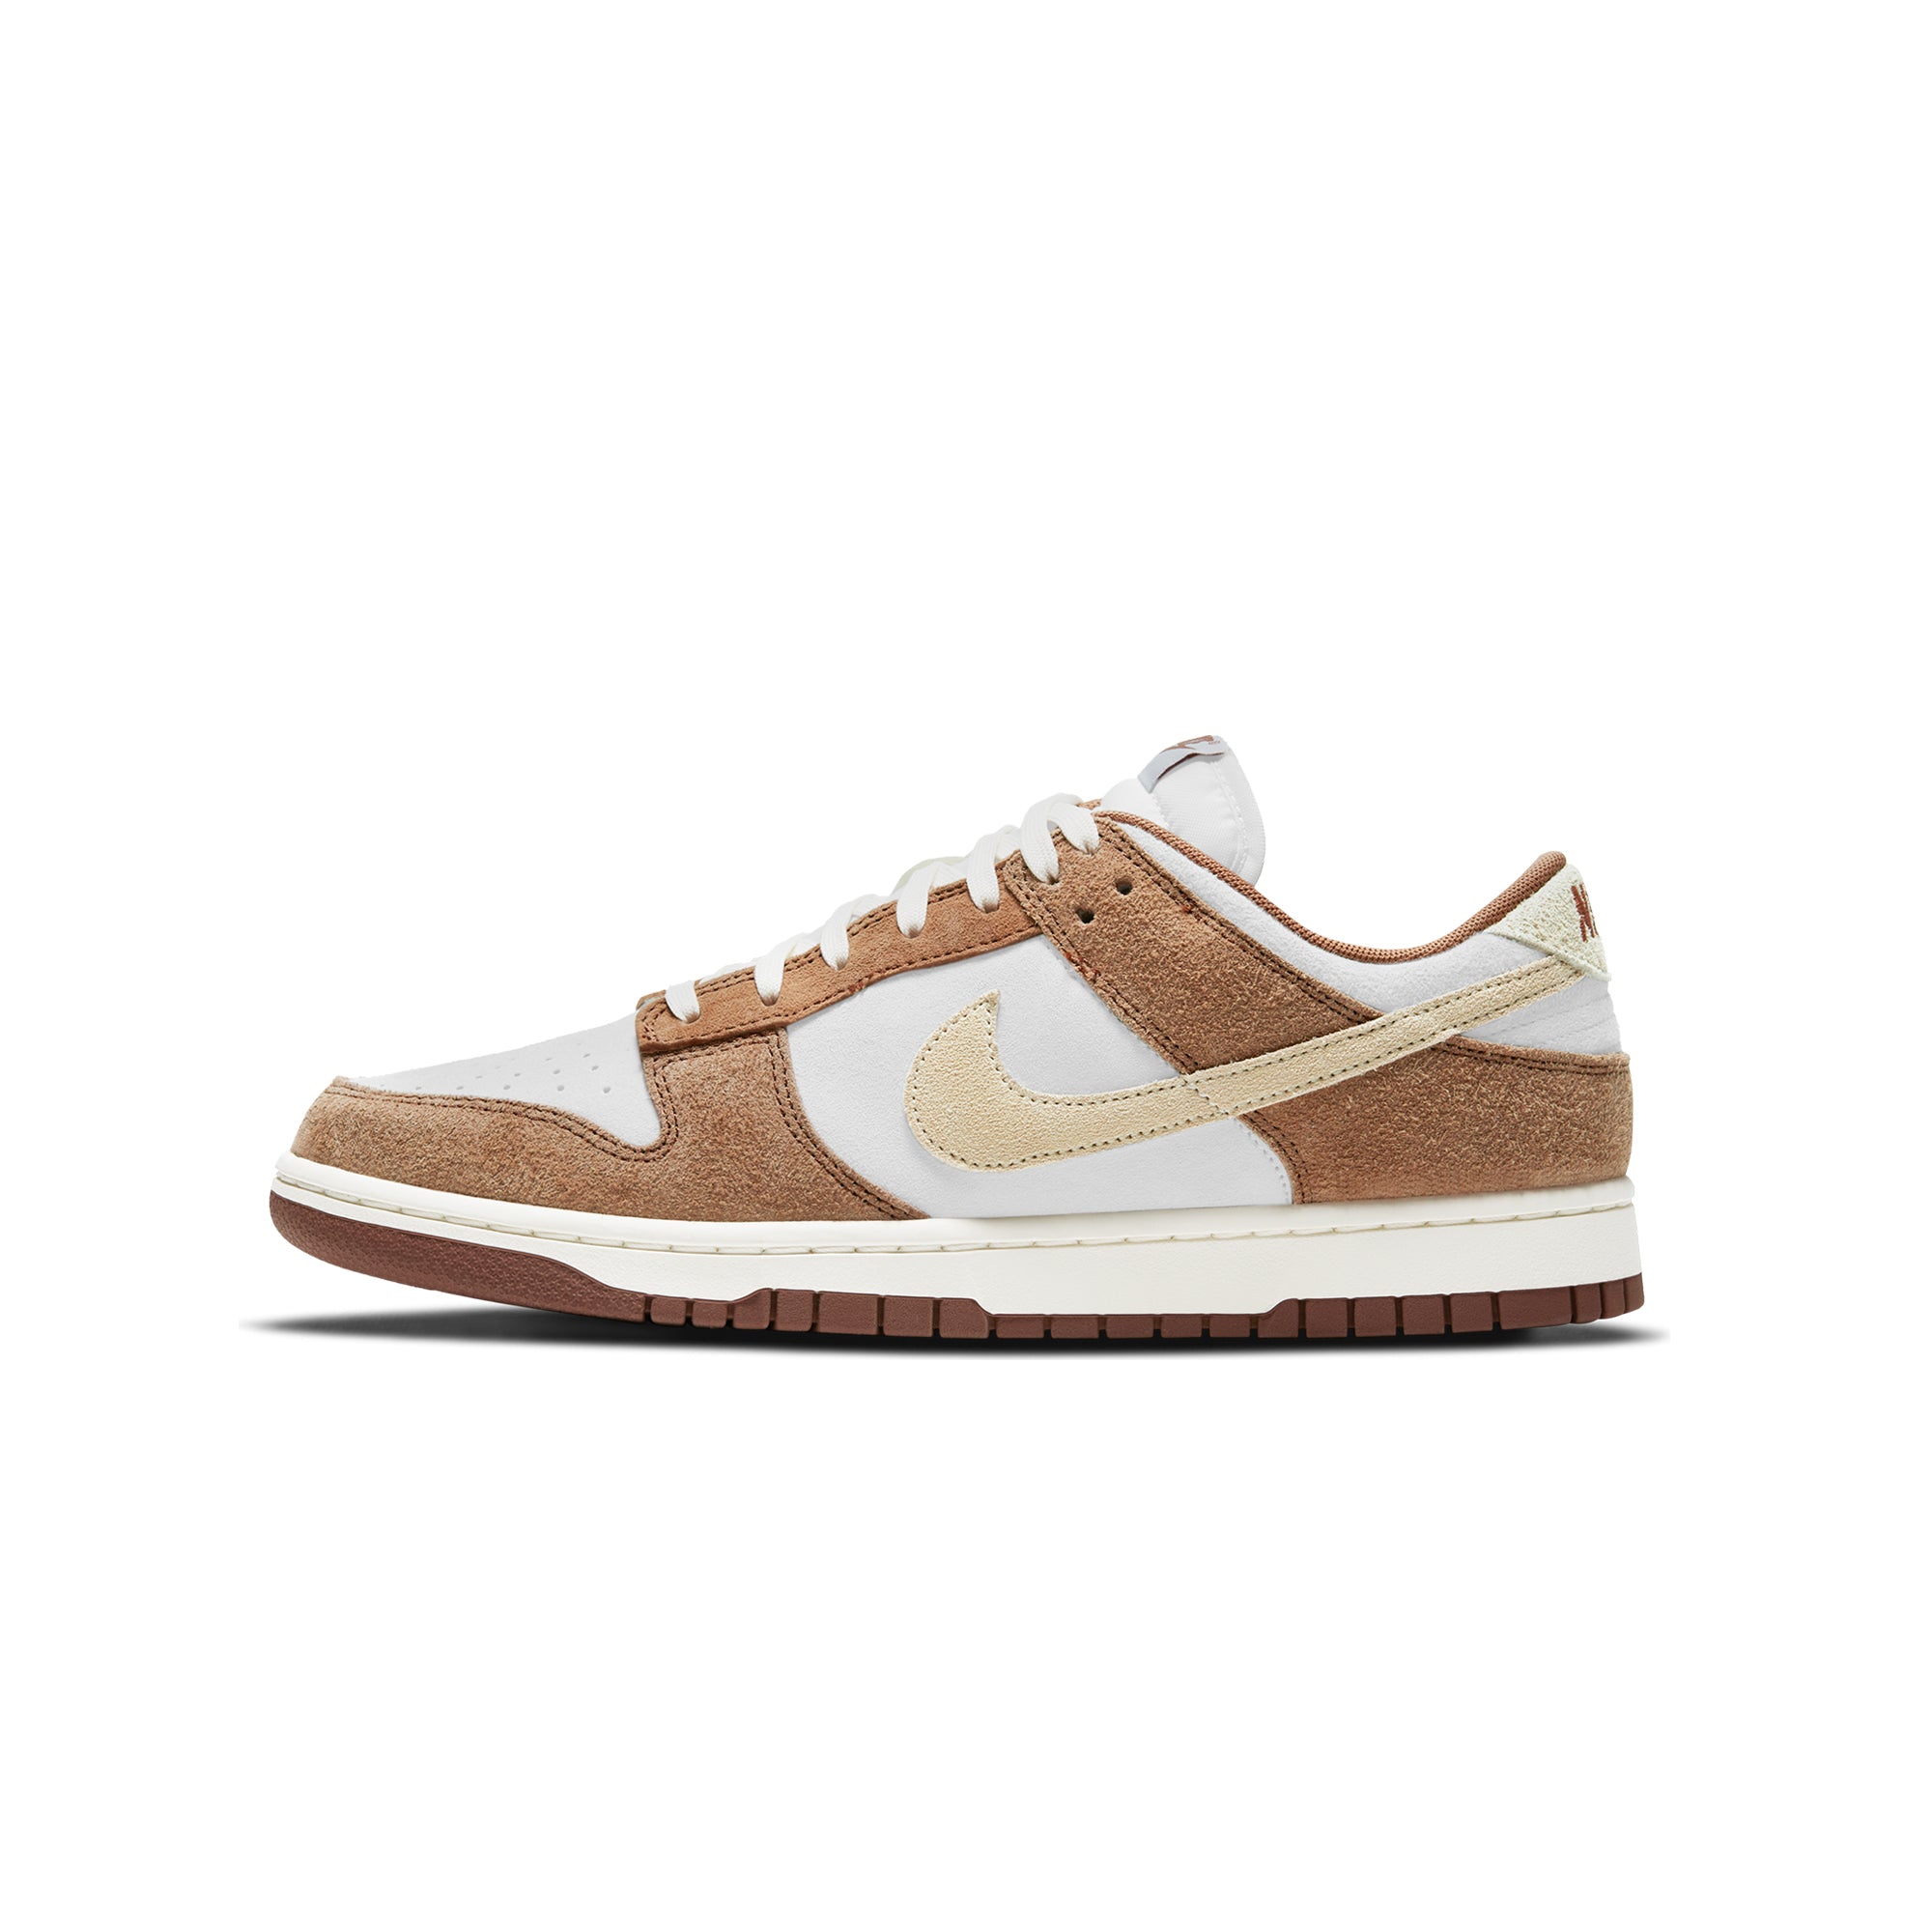 Nike Dunk Low Retro Premium 'Curry' Shoes – Extra Butter